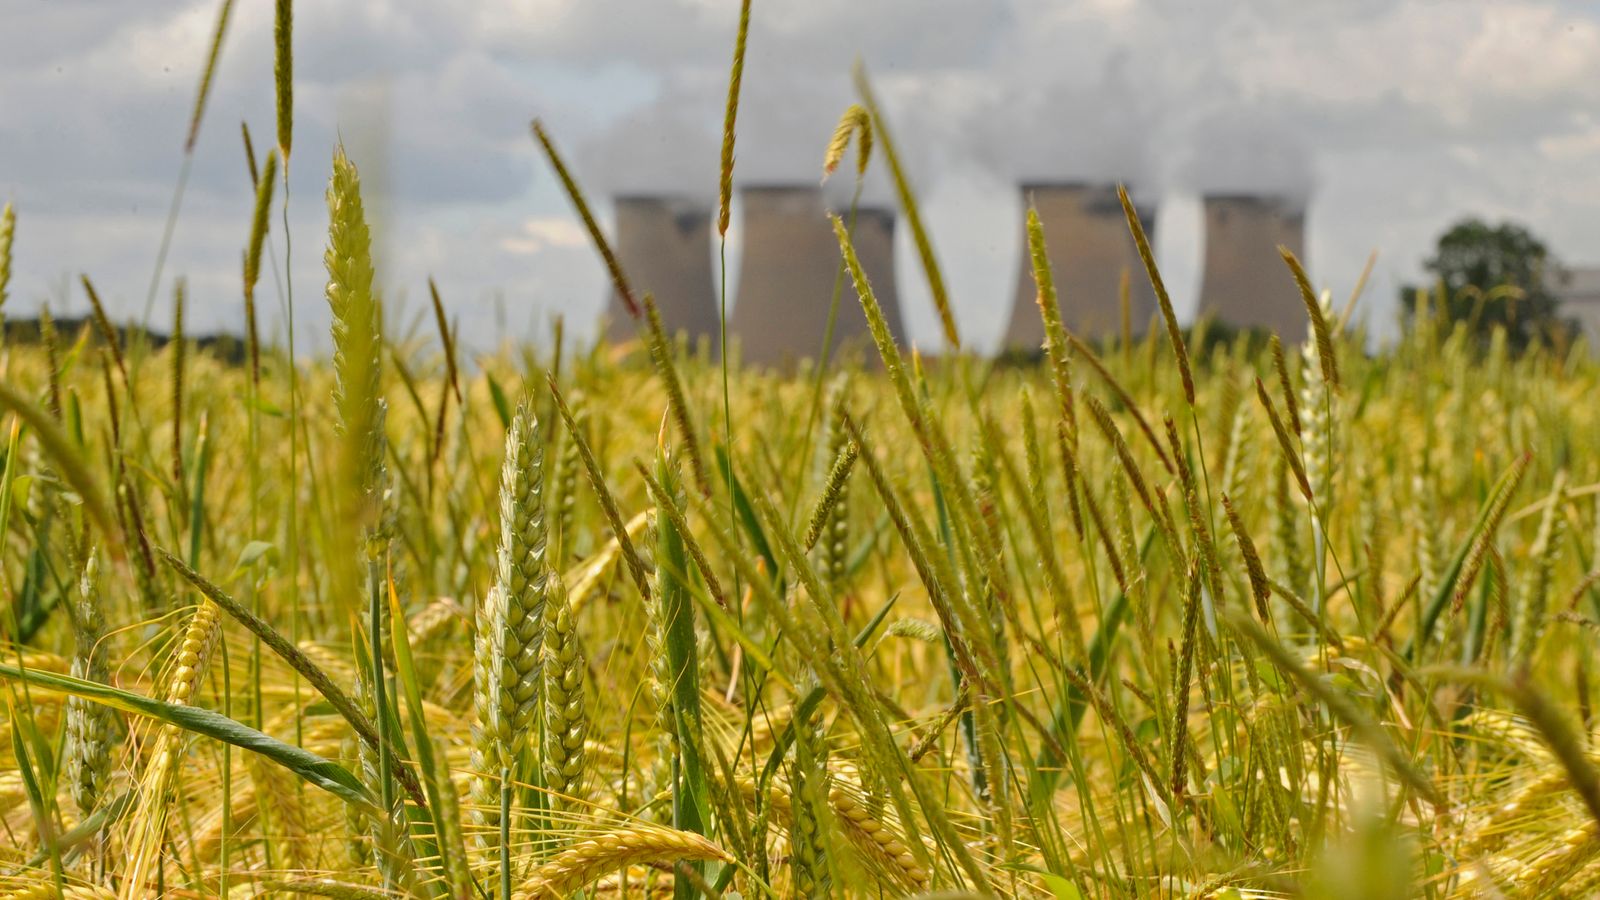 Government can't prove biomass industry meets sustainability rules, National Audit Office says